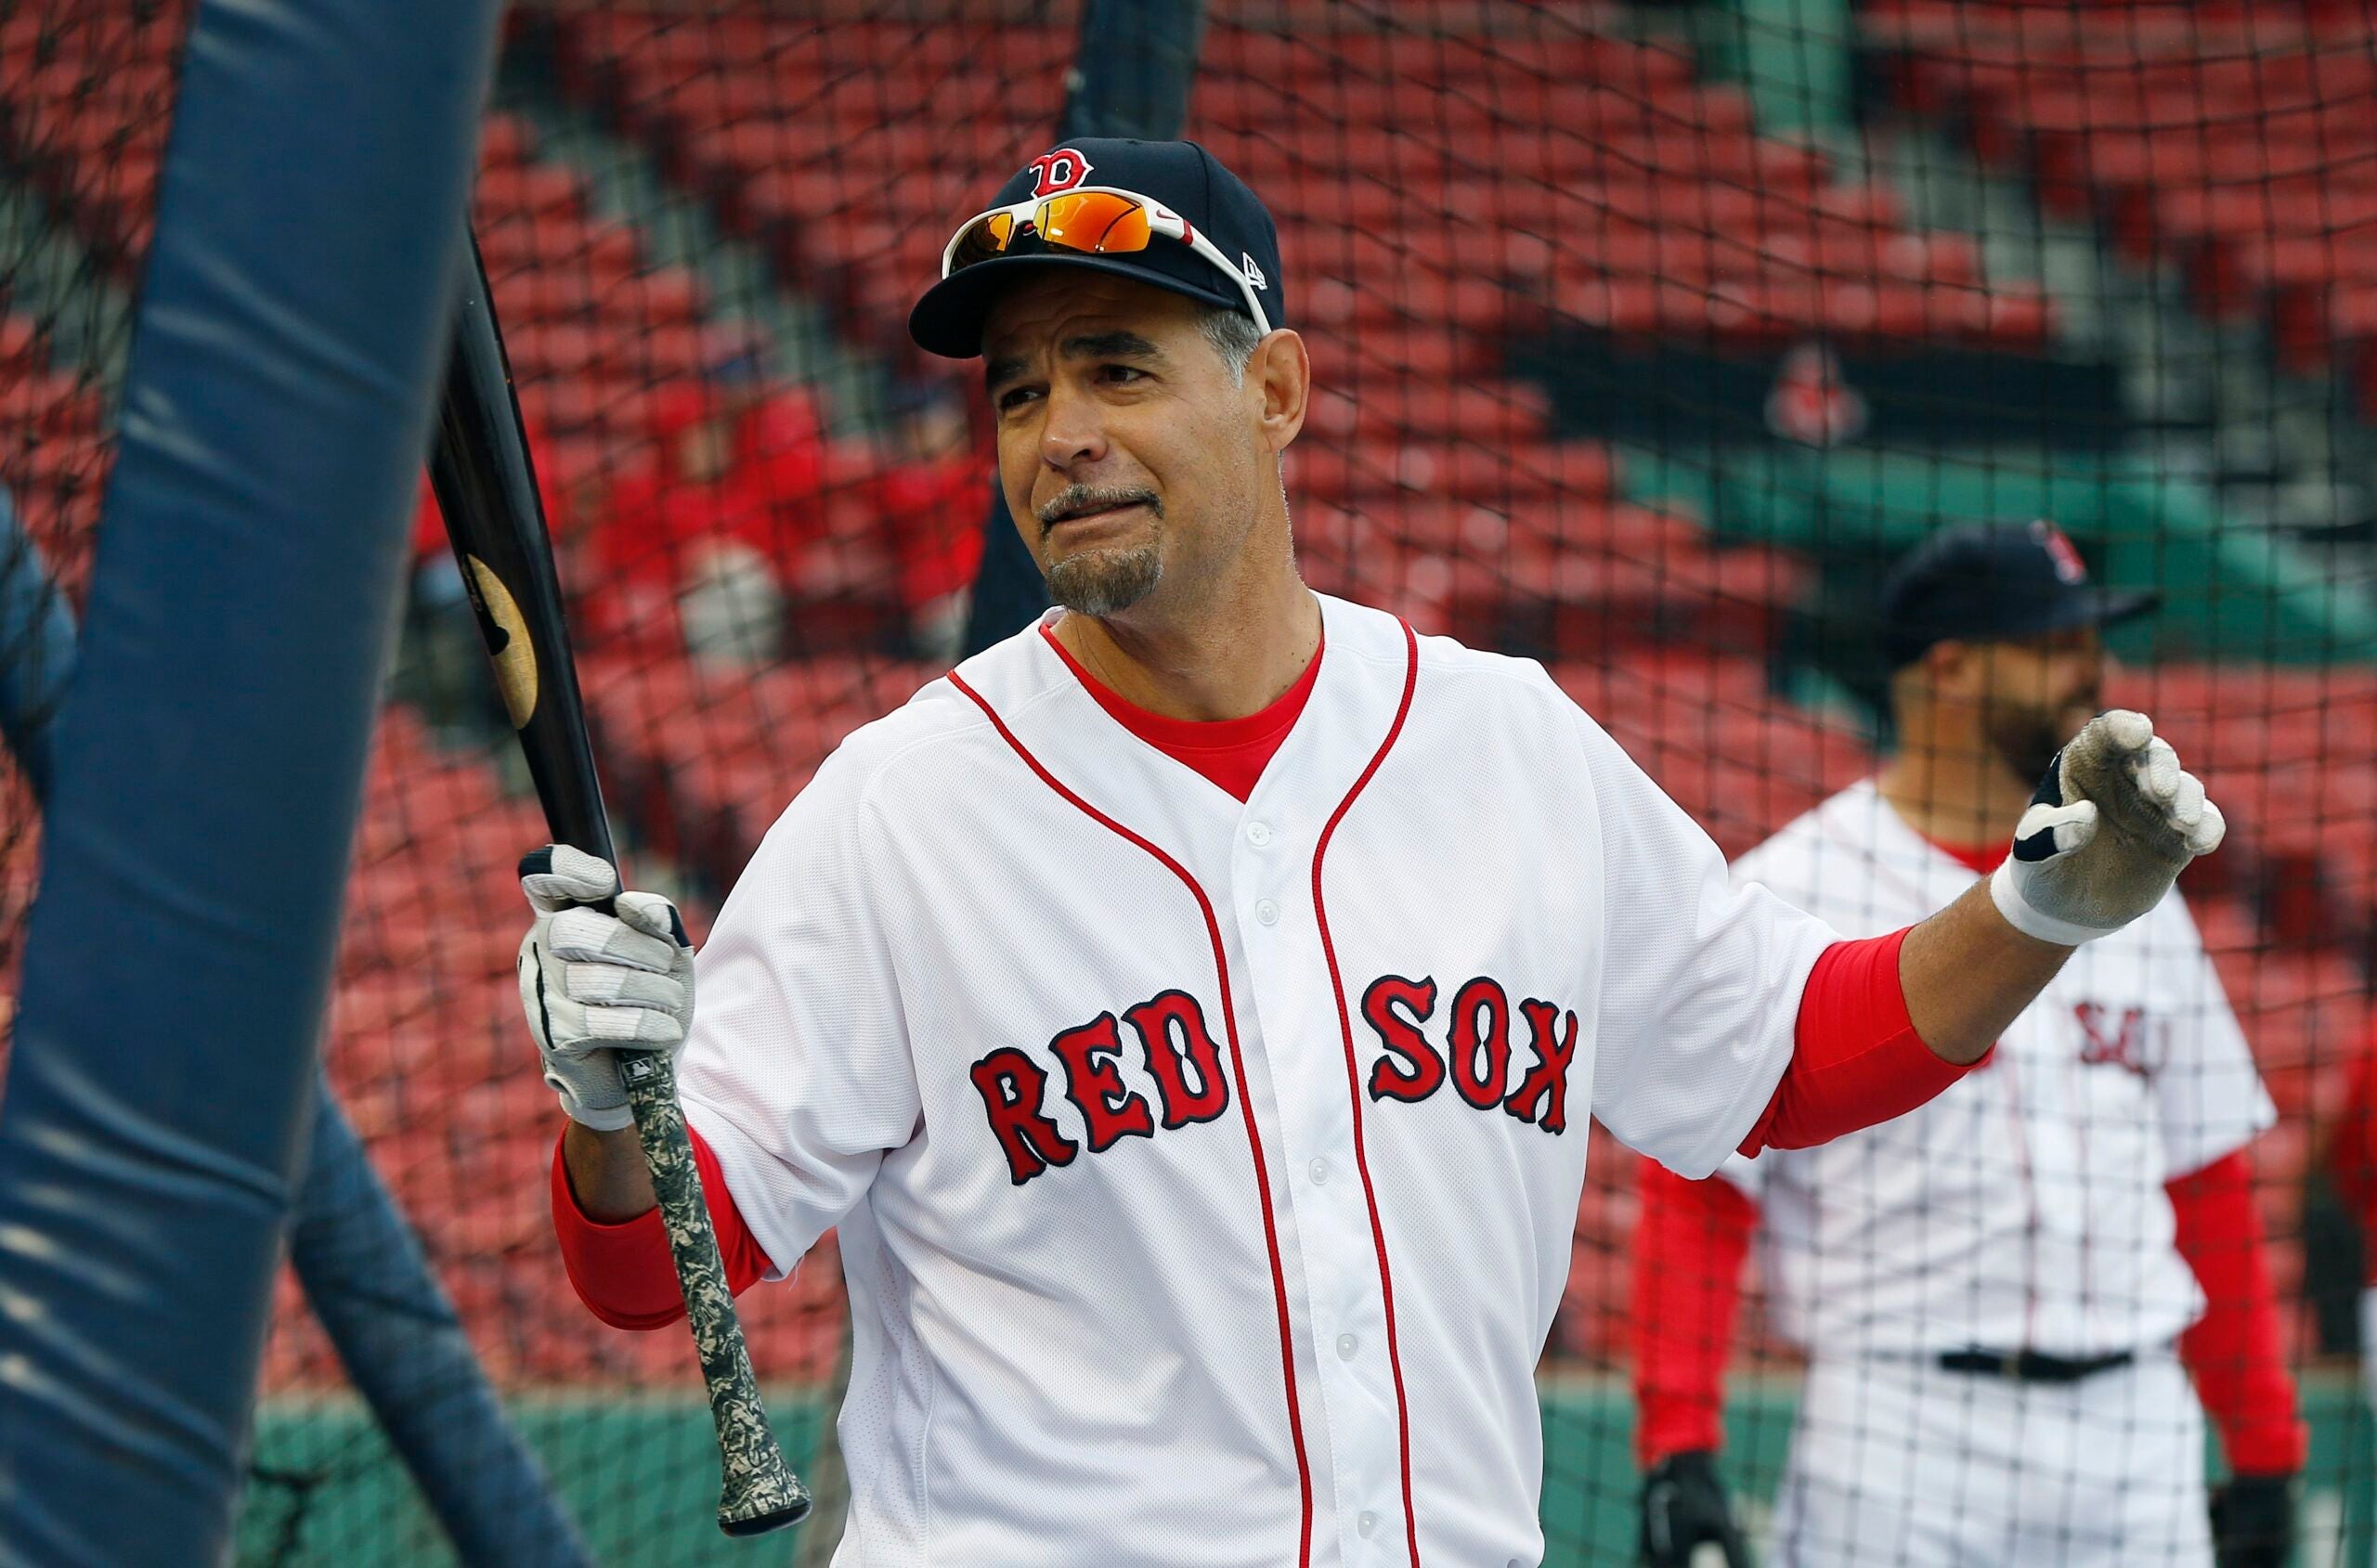 Red Sox Hall of Famer Mike Lowell shares that he's 22 years cancer free